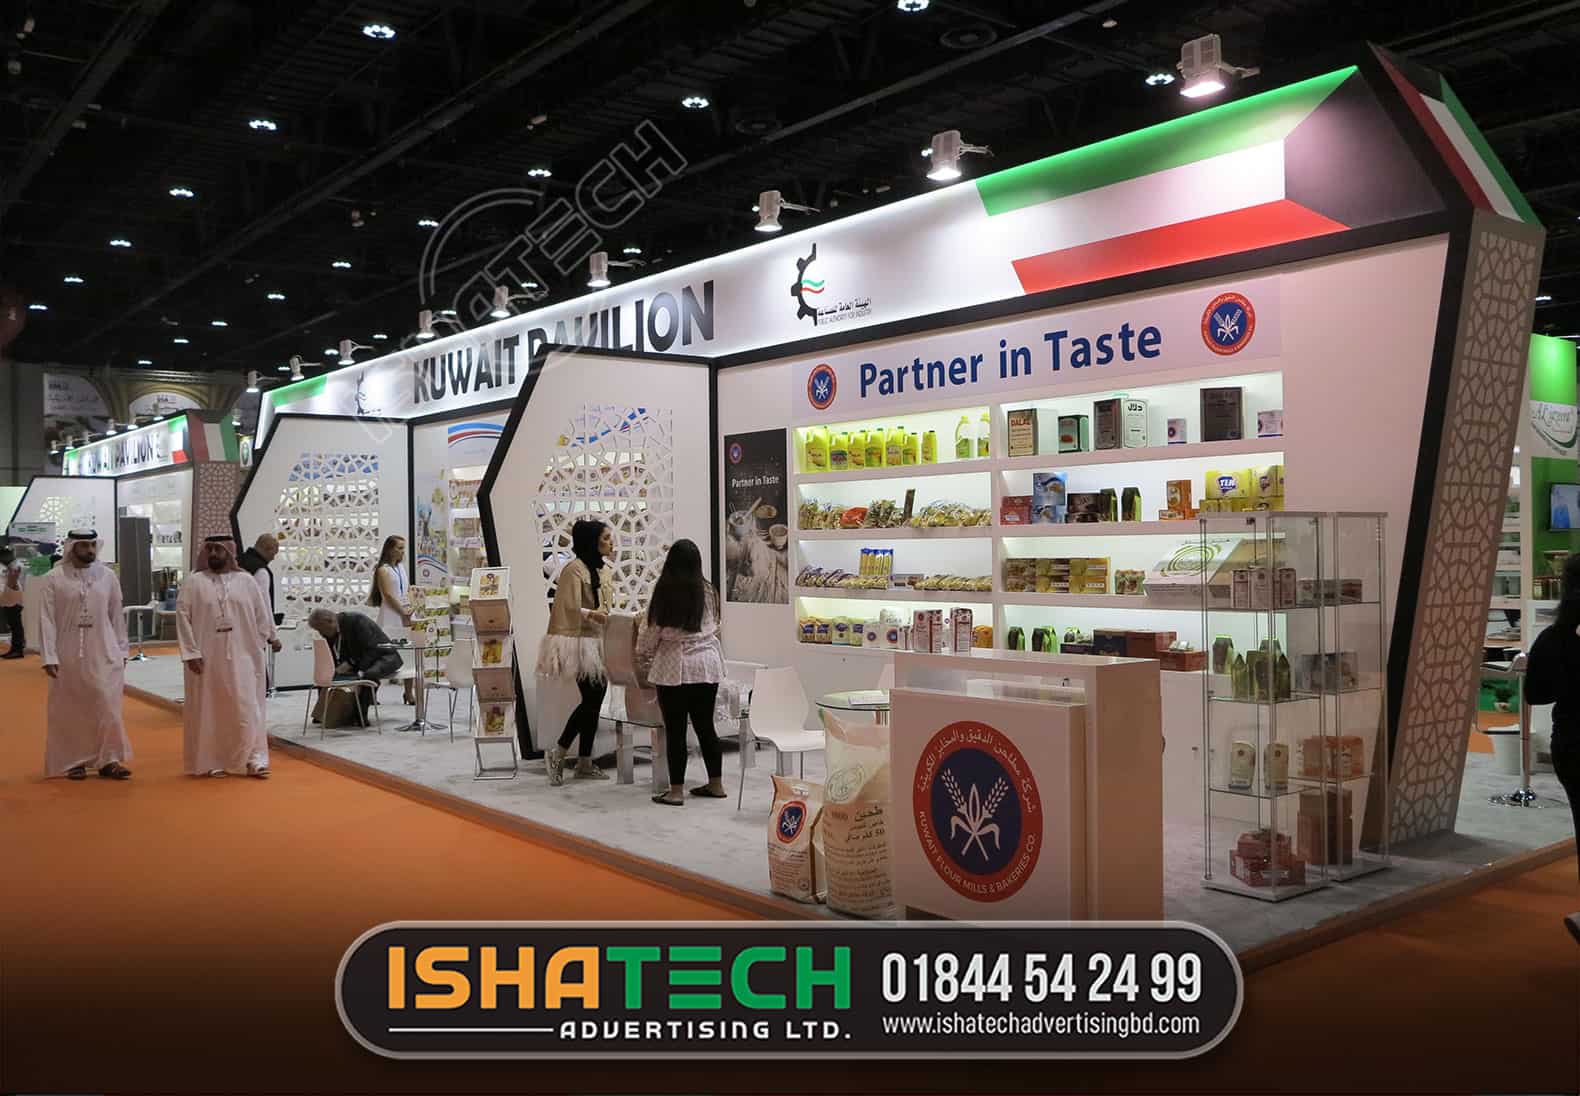 Exhibition space or Exhibition booth interior design in Dhaka